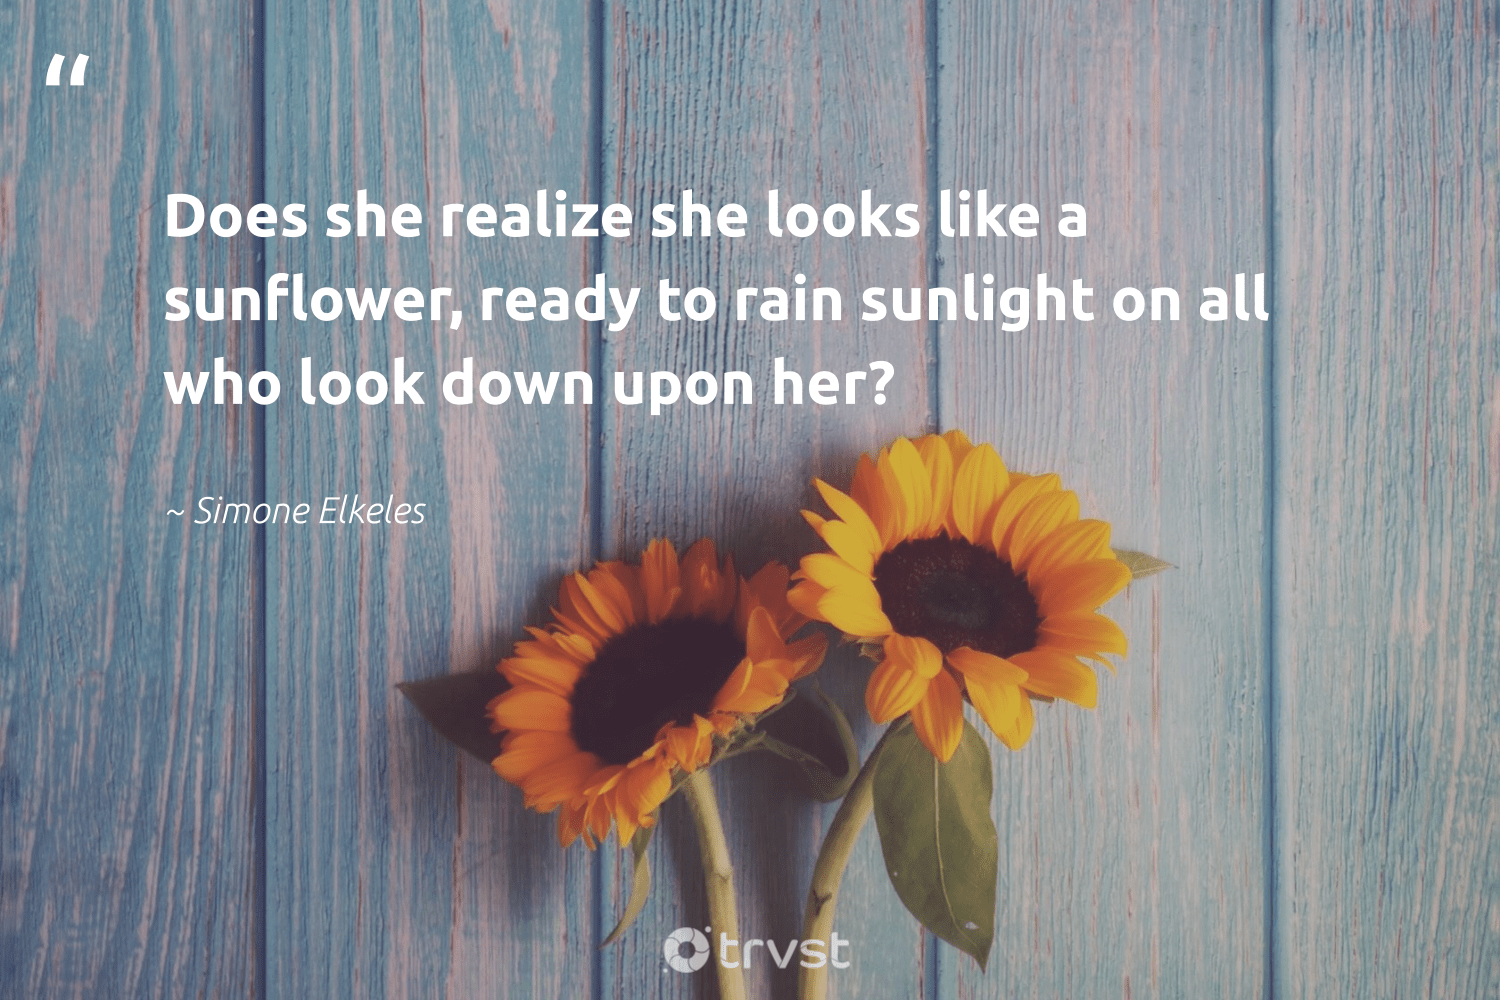 48 Sunflower Quotes to Brighten Up Your Day and Inspire a Smile